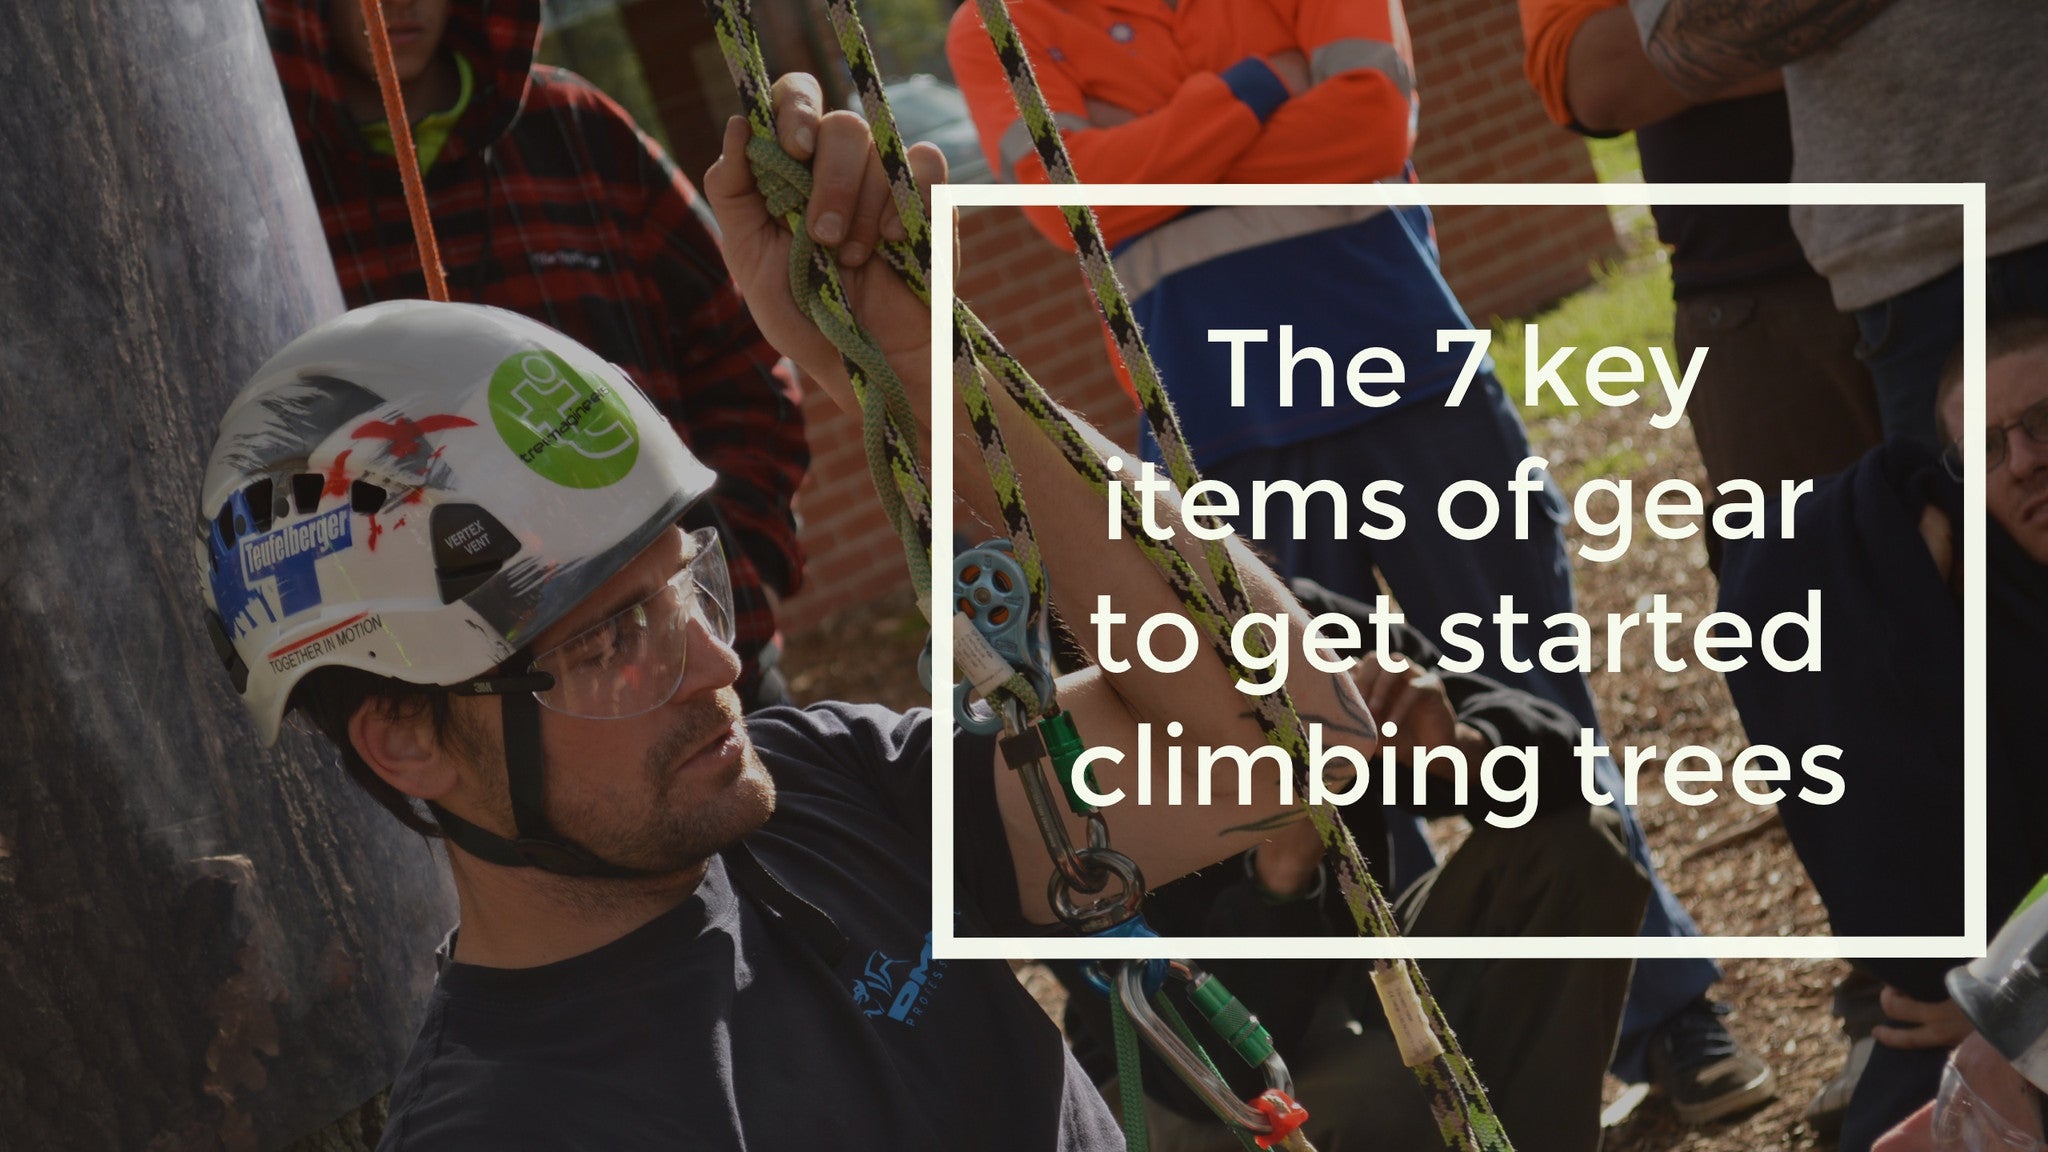 New to Tree Climbing? Here's the 7 key items of gear you need to get s -  Treegear